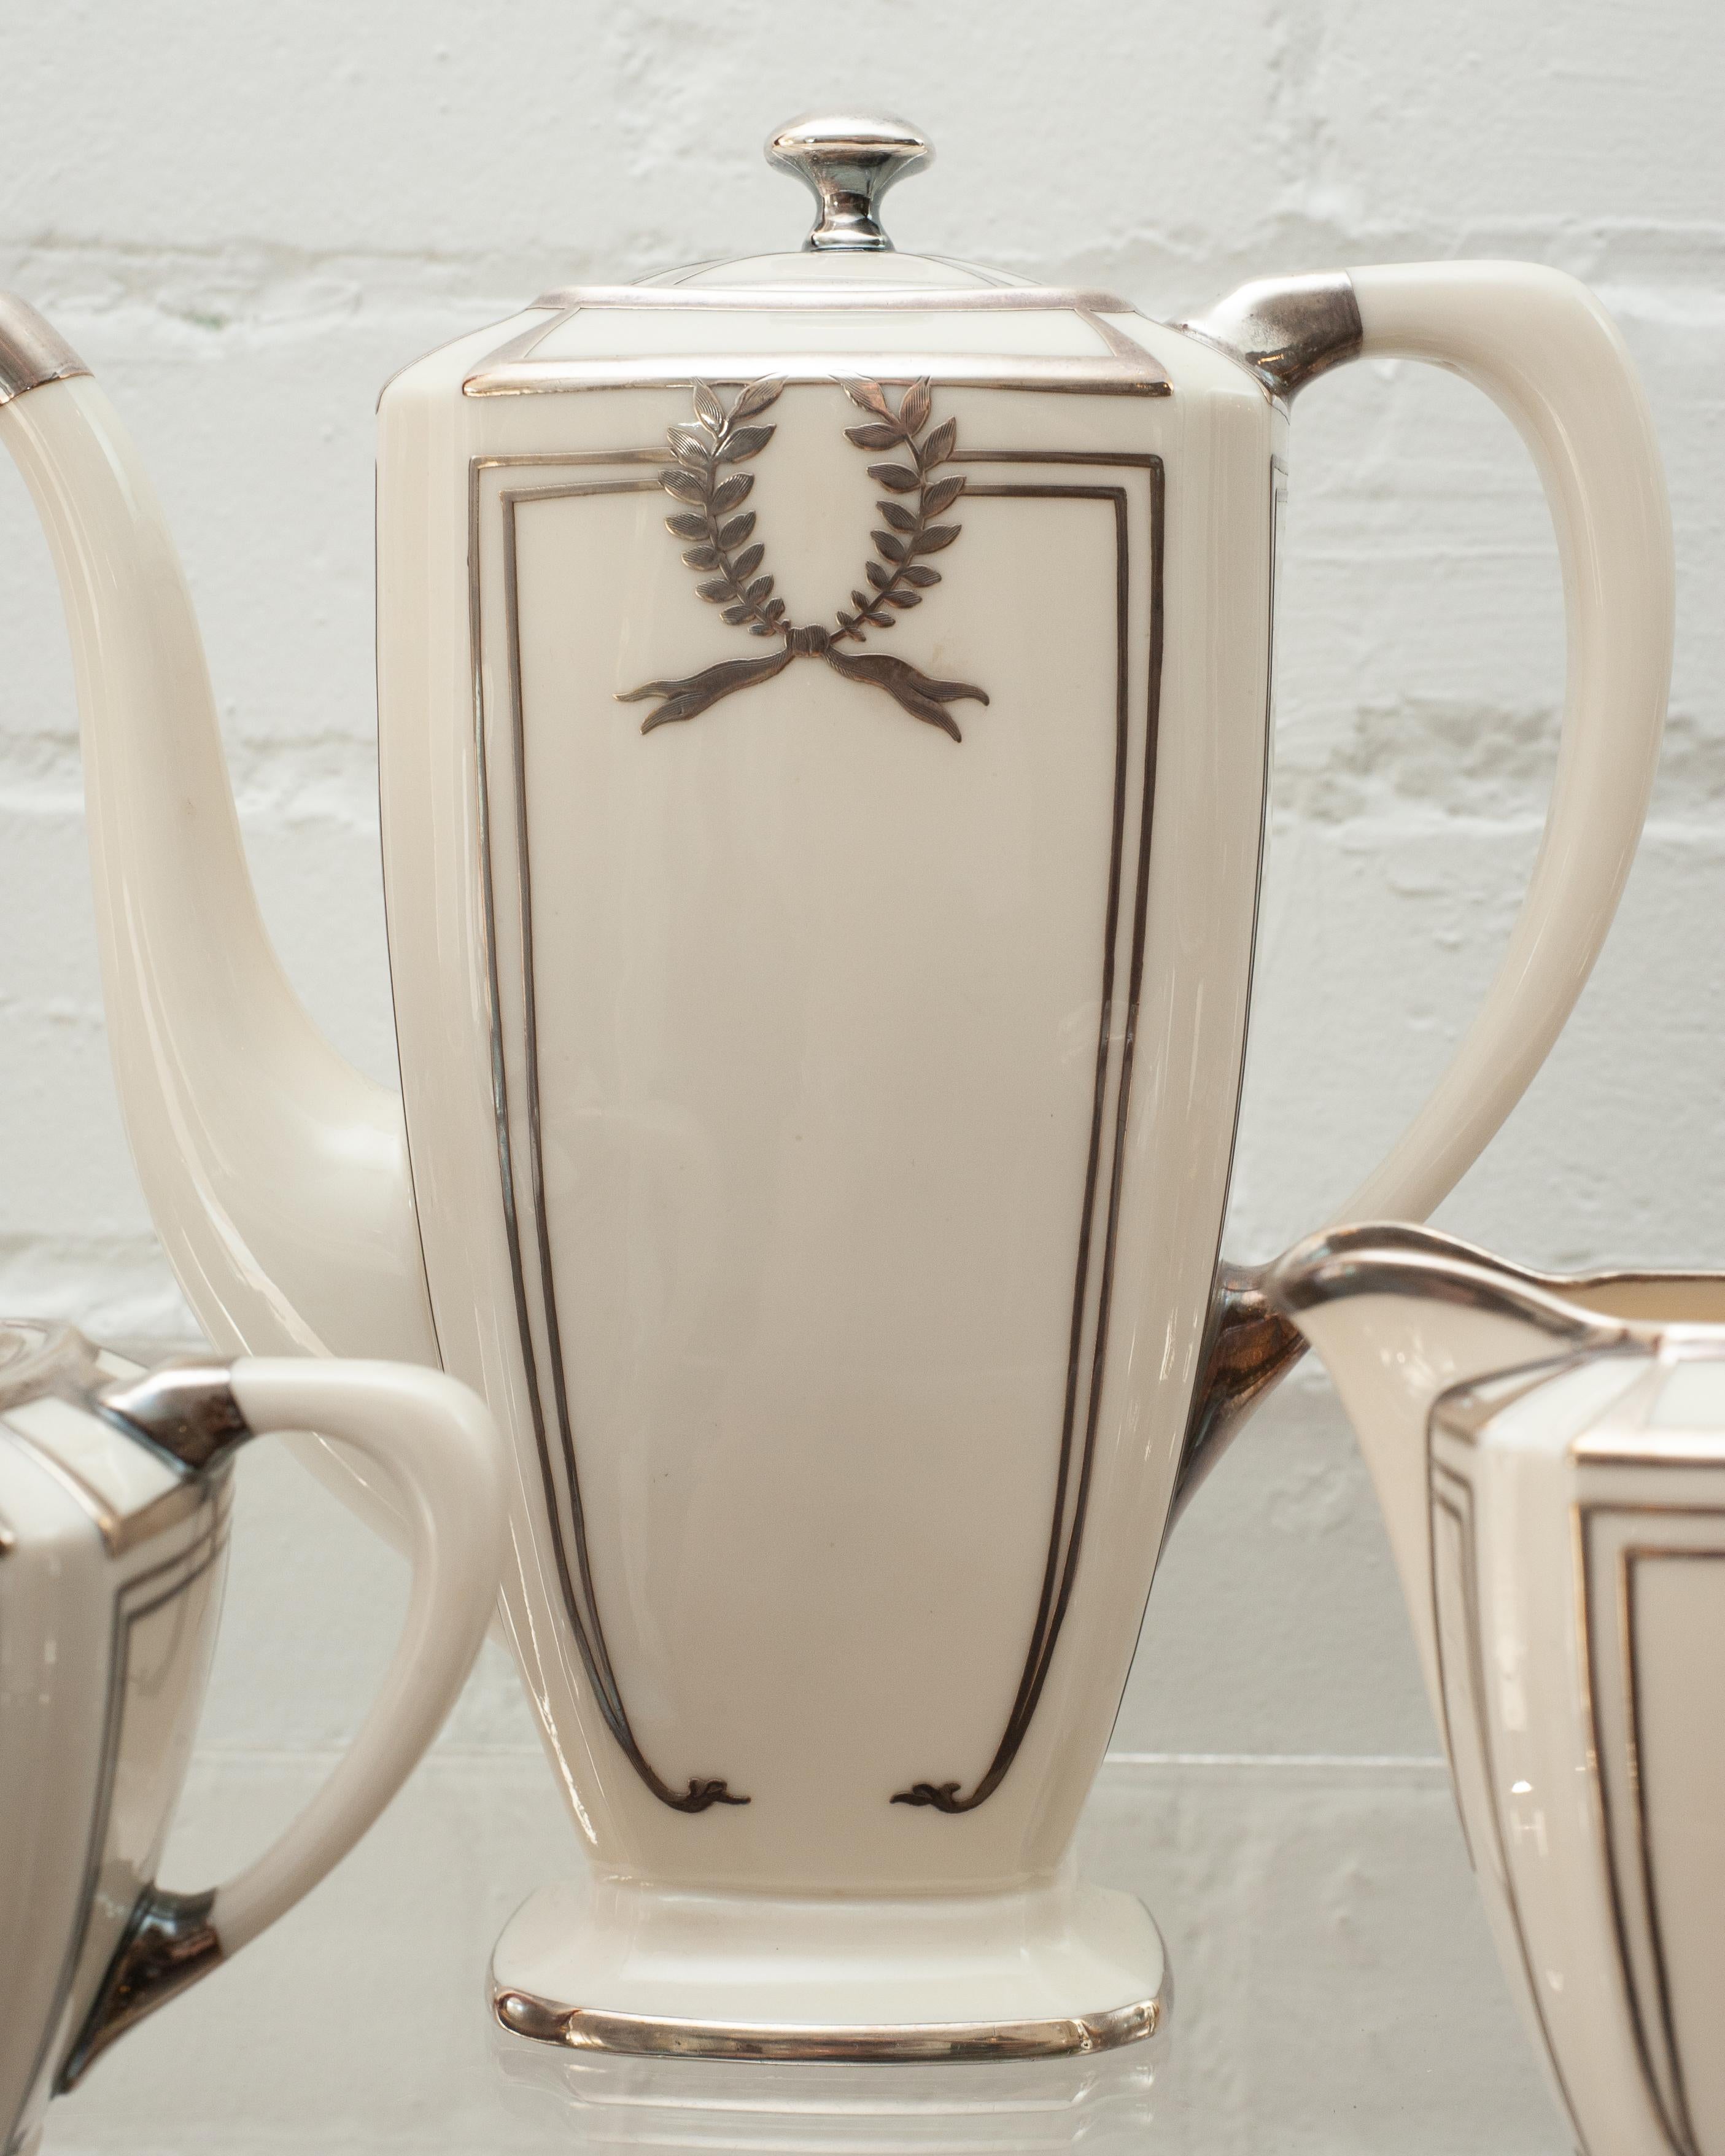 Invite your guests for tea and macaroons and impress them with this crème porcelain Lenox Art Deco coffee set with sterling silver details. Set includes one coffee pot, one creamer and one sugar bowl.